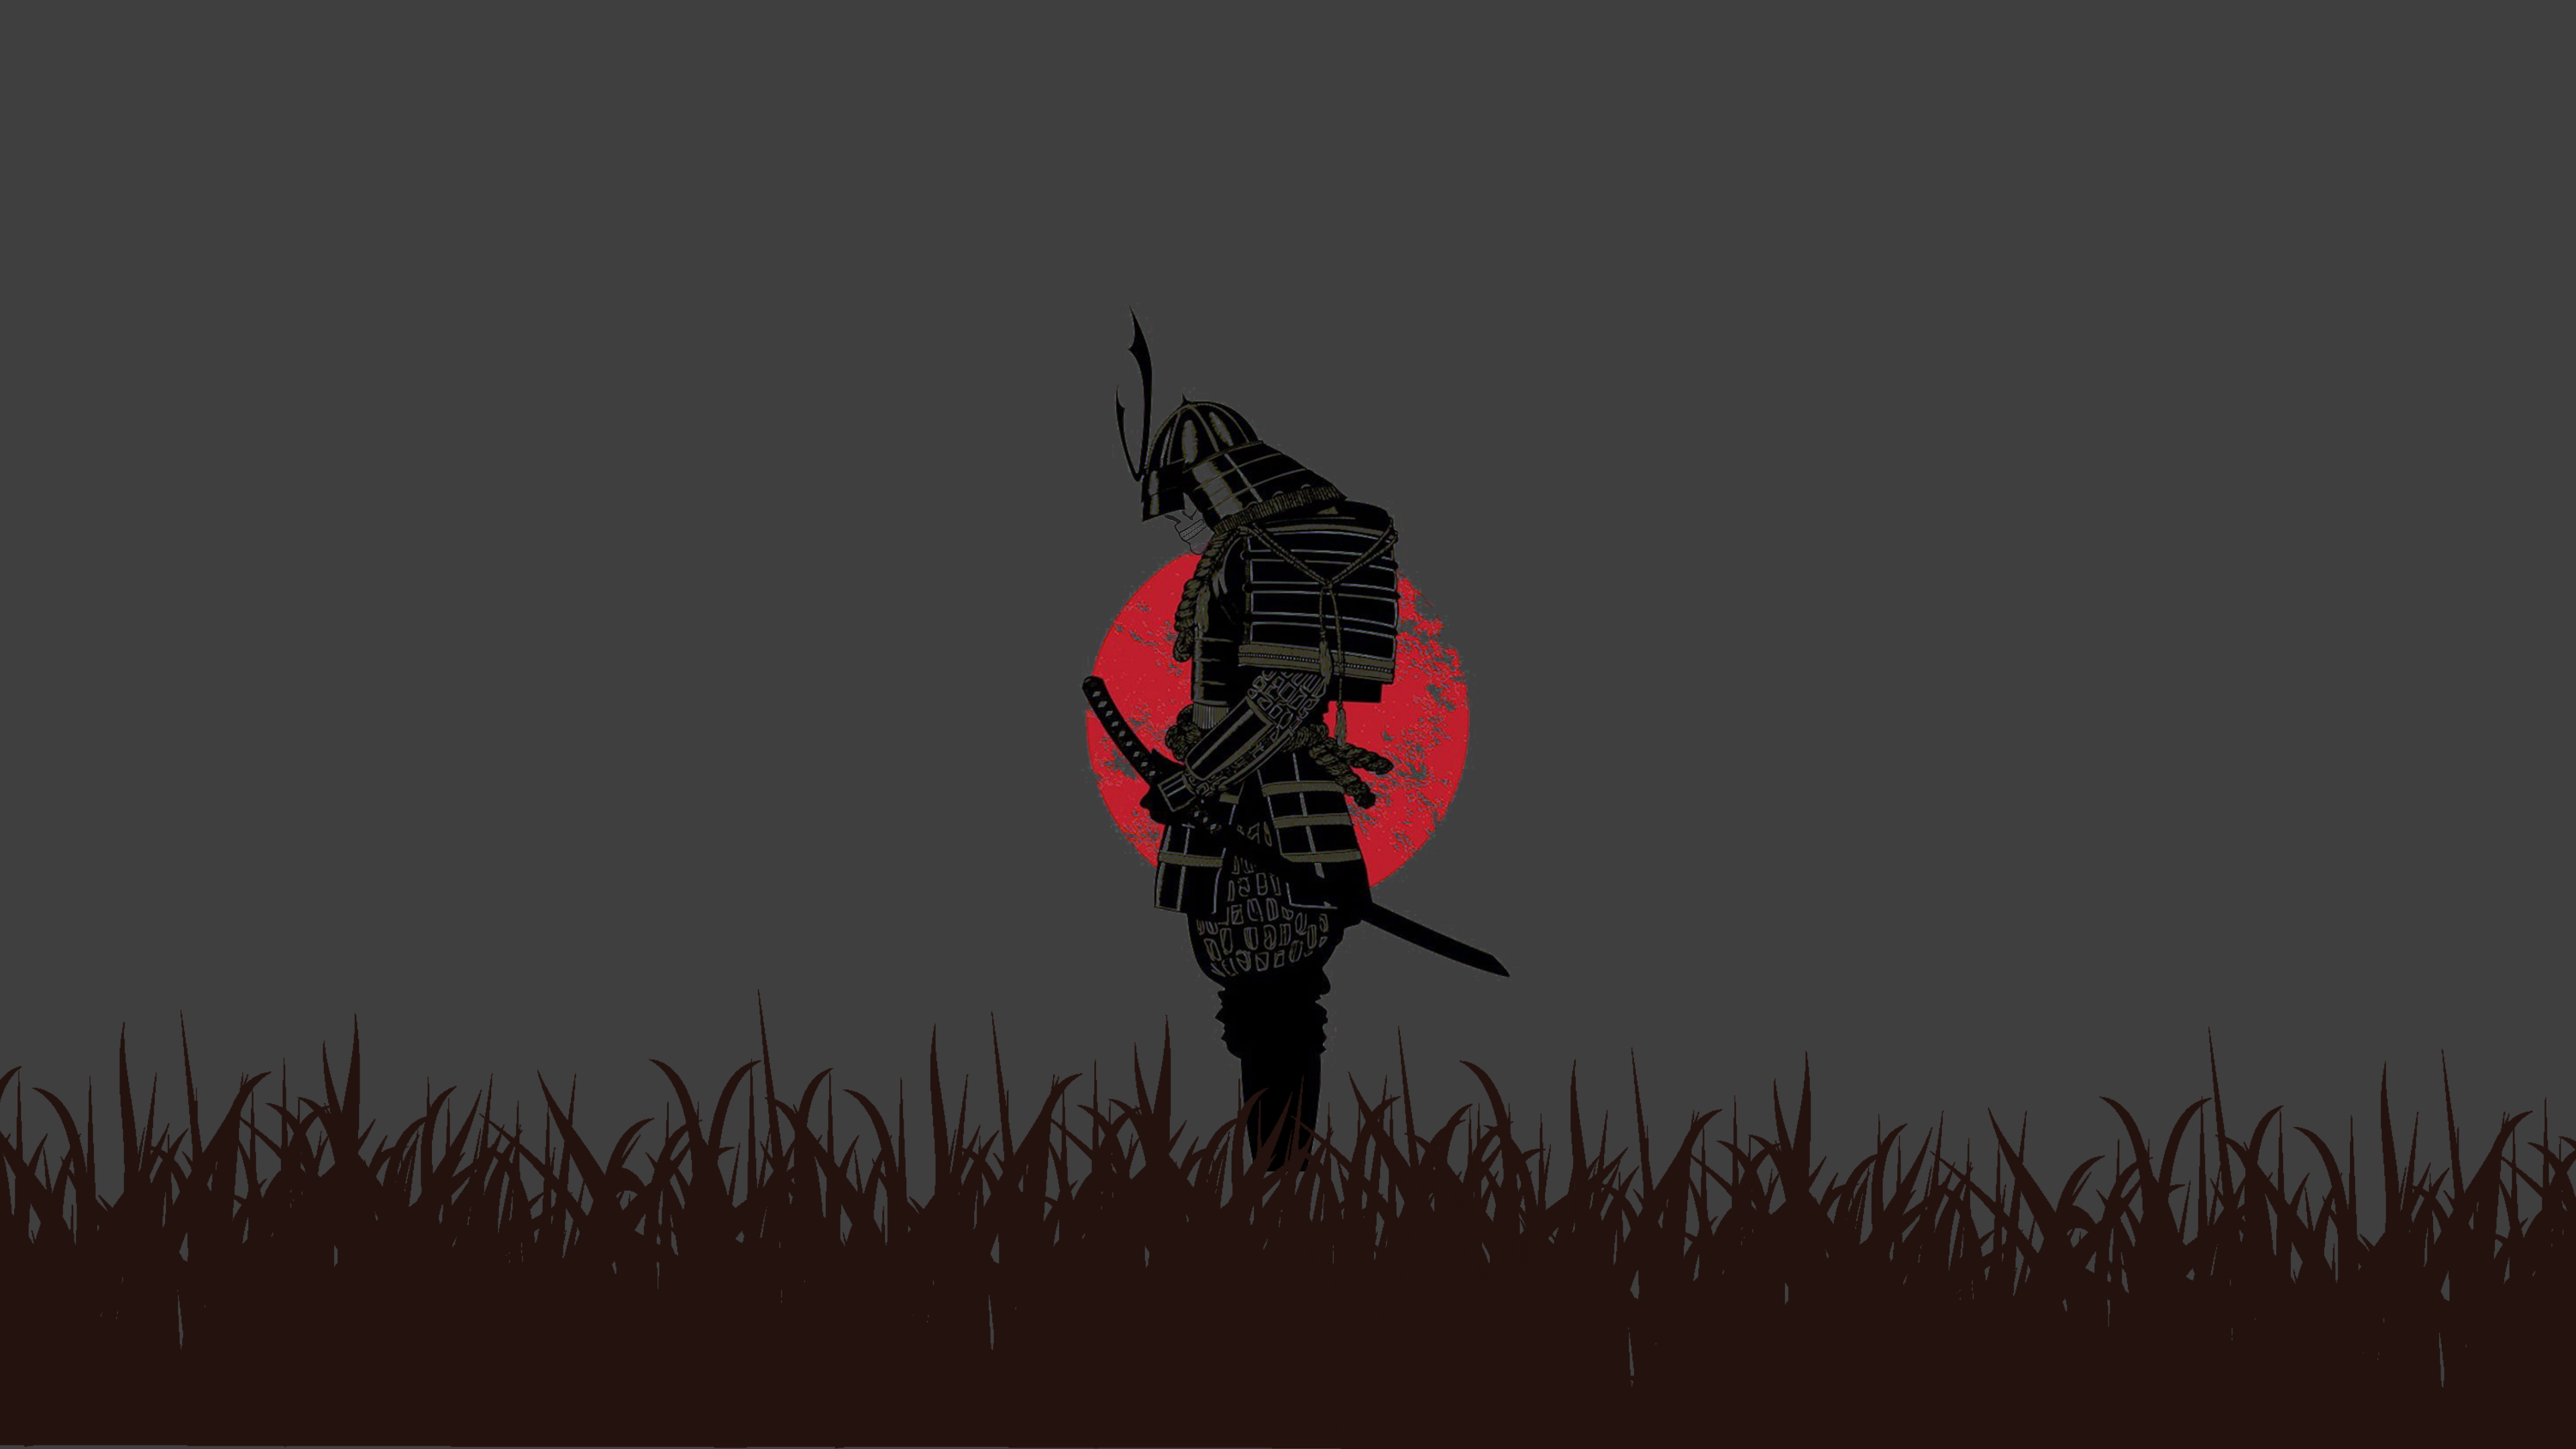 Samurai 4K wallpaper for your desktop or mobile screen free and easy to download